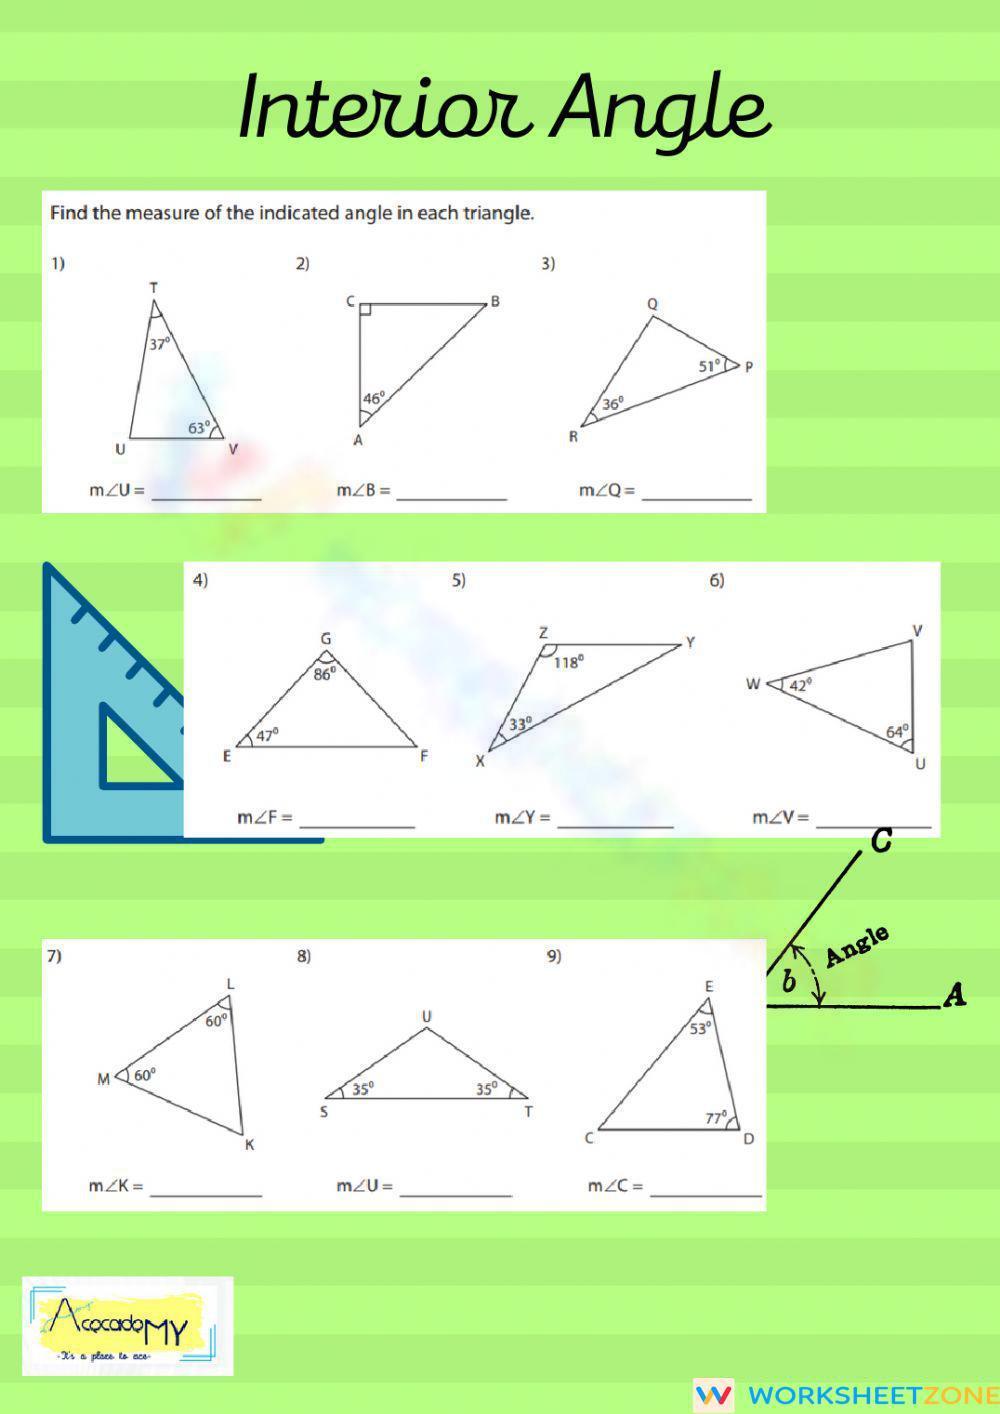 Interior Angle In A Triangle Worksheet 9045